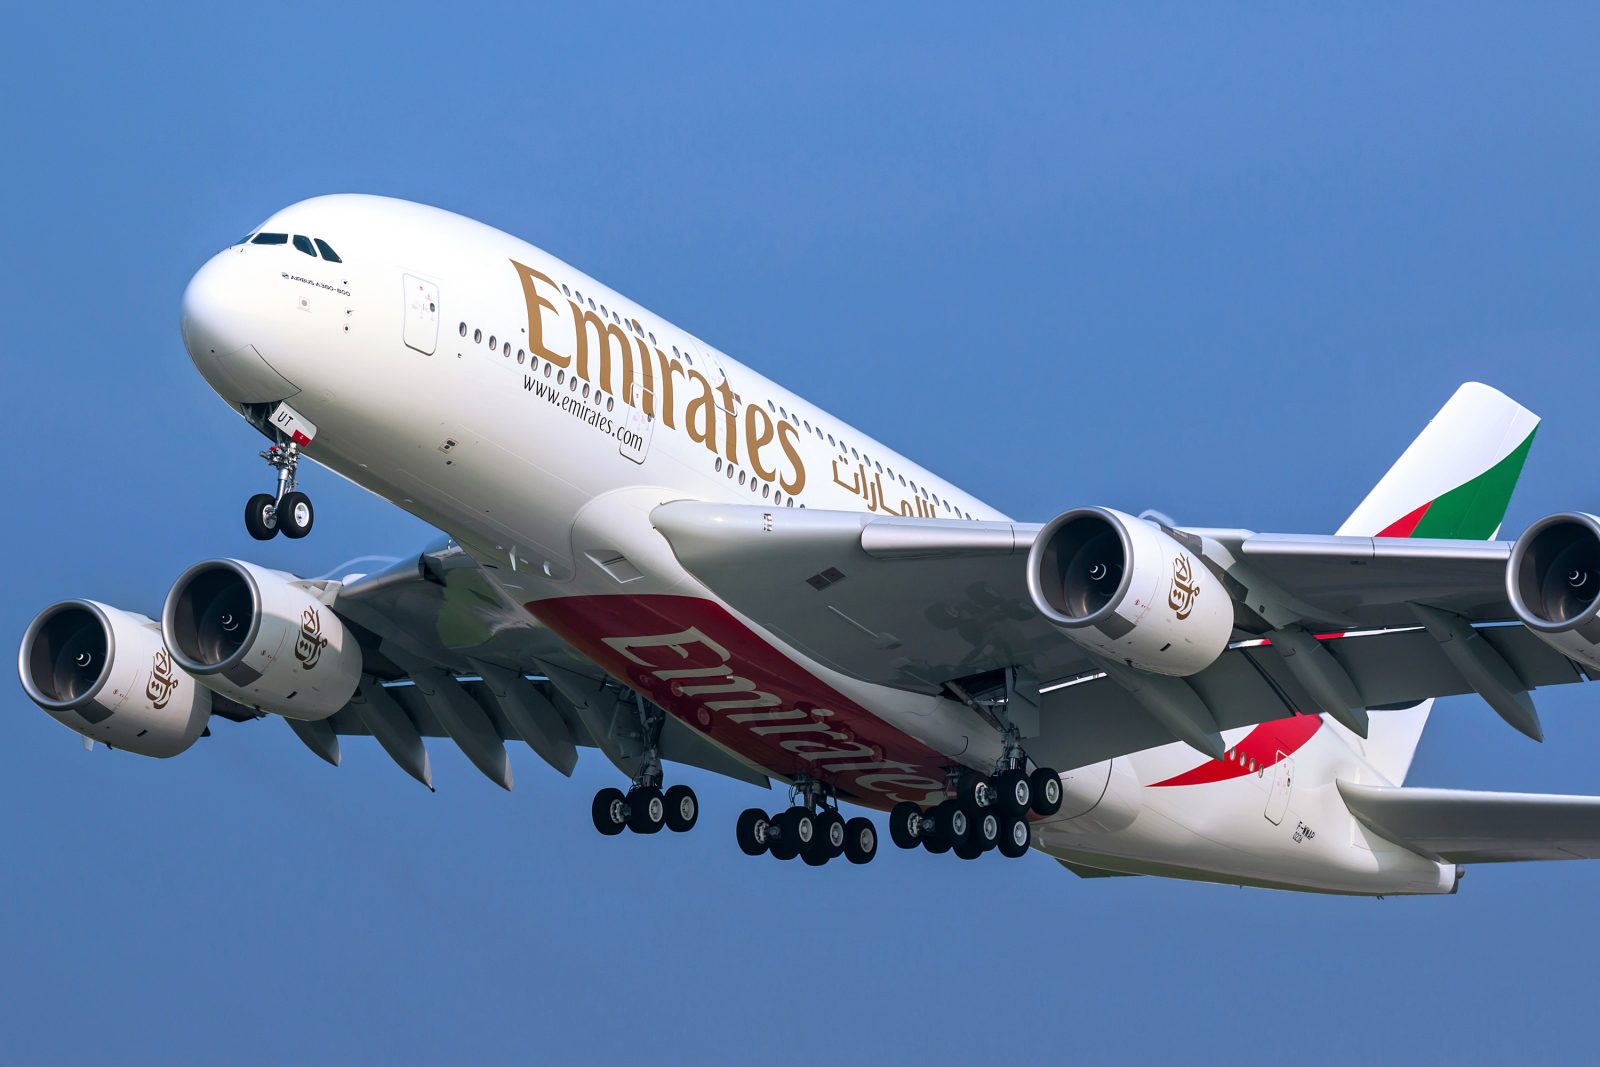 Emirates to Fly One-Off Airbus A380 Service to Cairo; Hopes to Make it Permanent Fixture